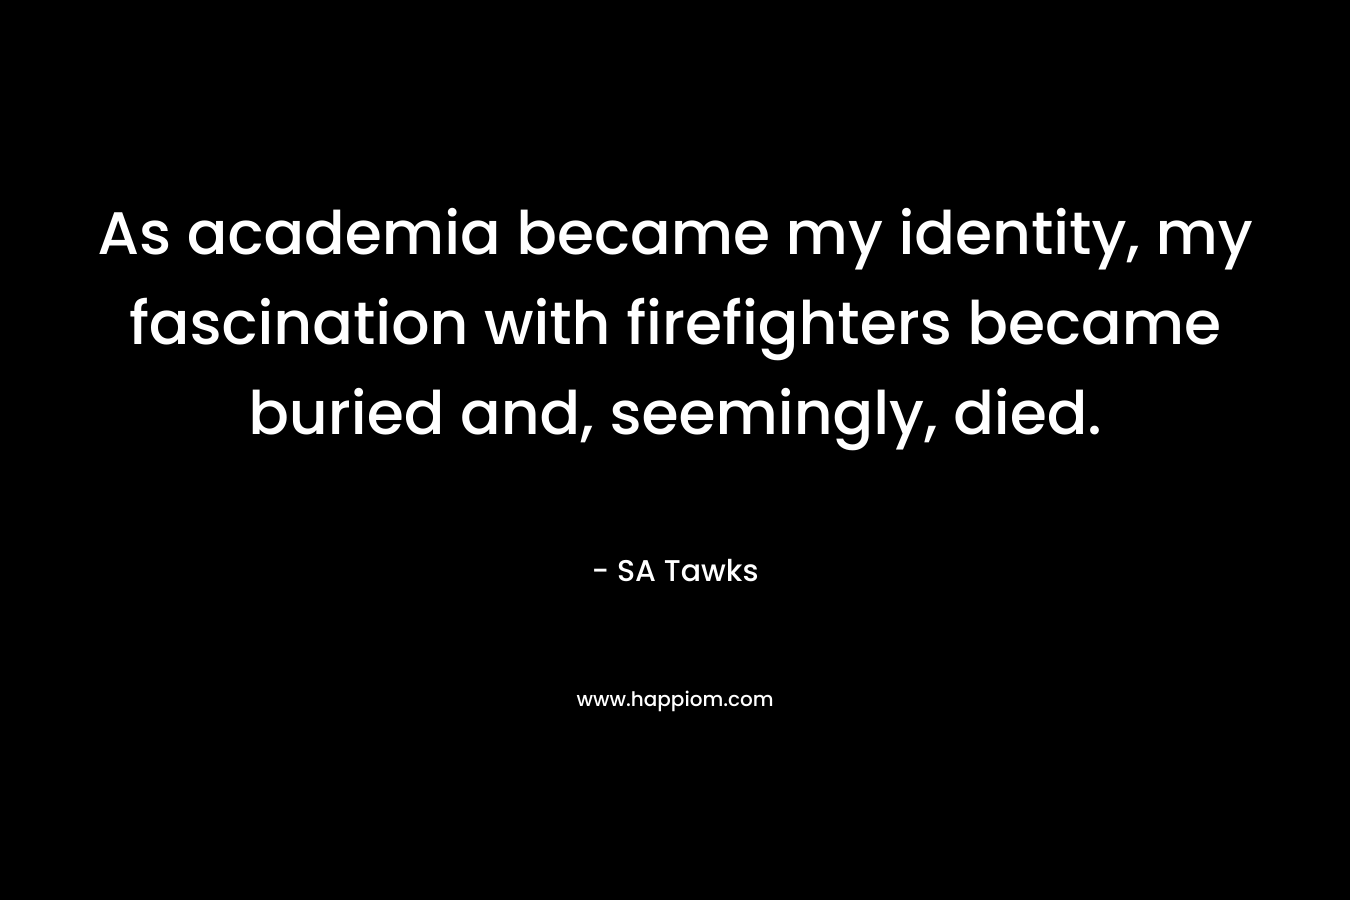 As academia became my identity, my fascination with firefighters became buried and, seemingly, died.